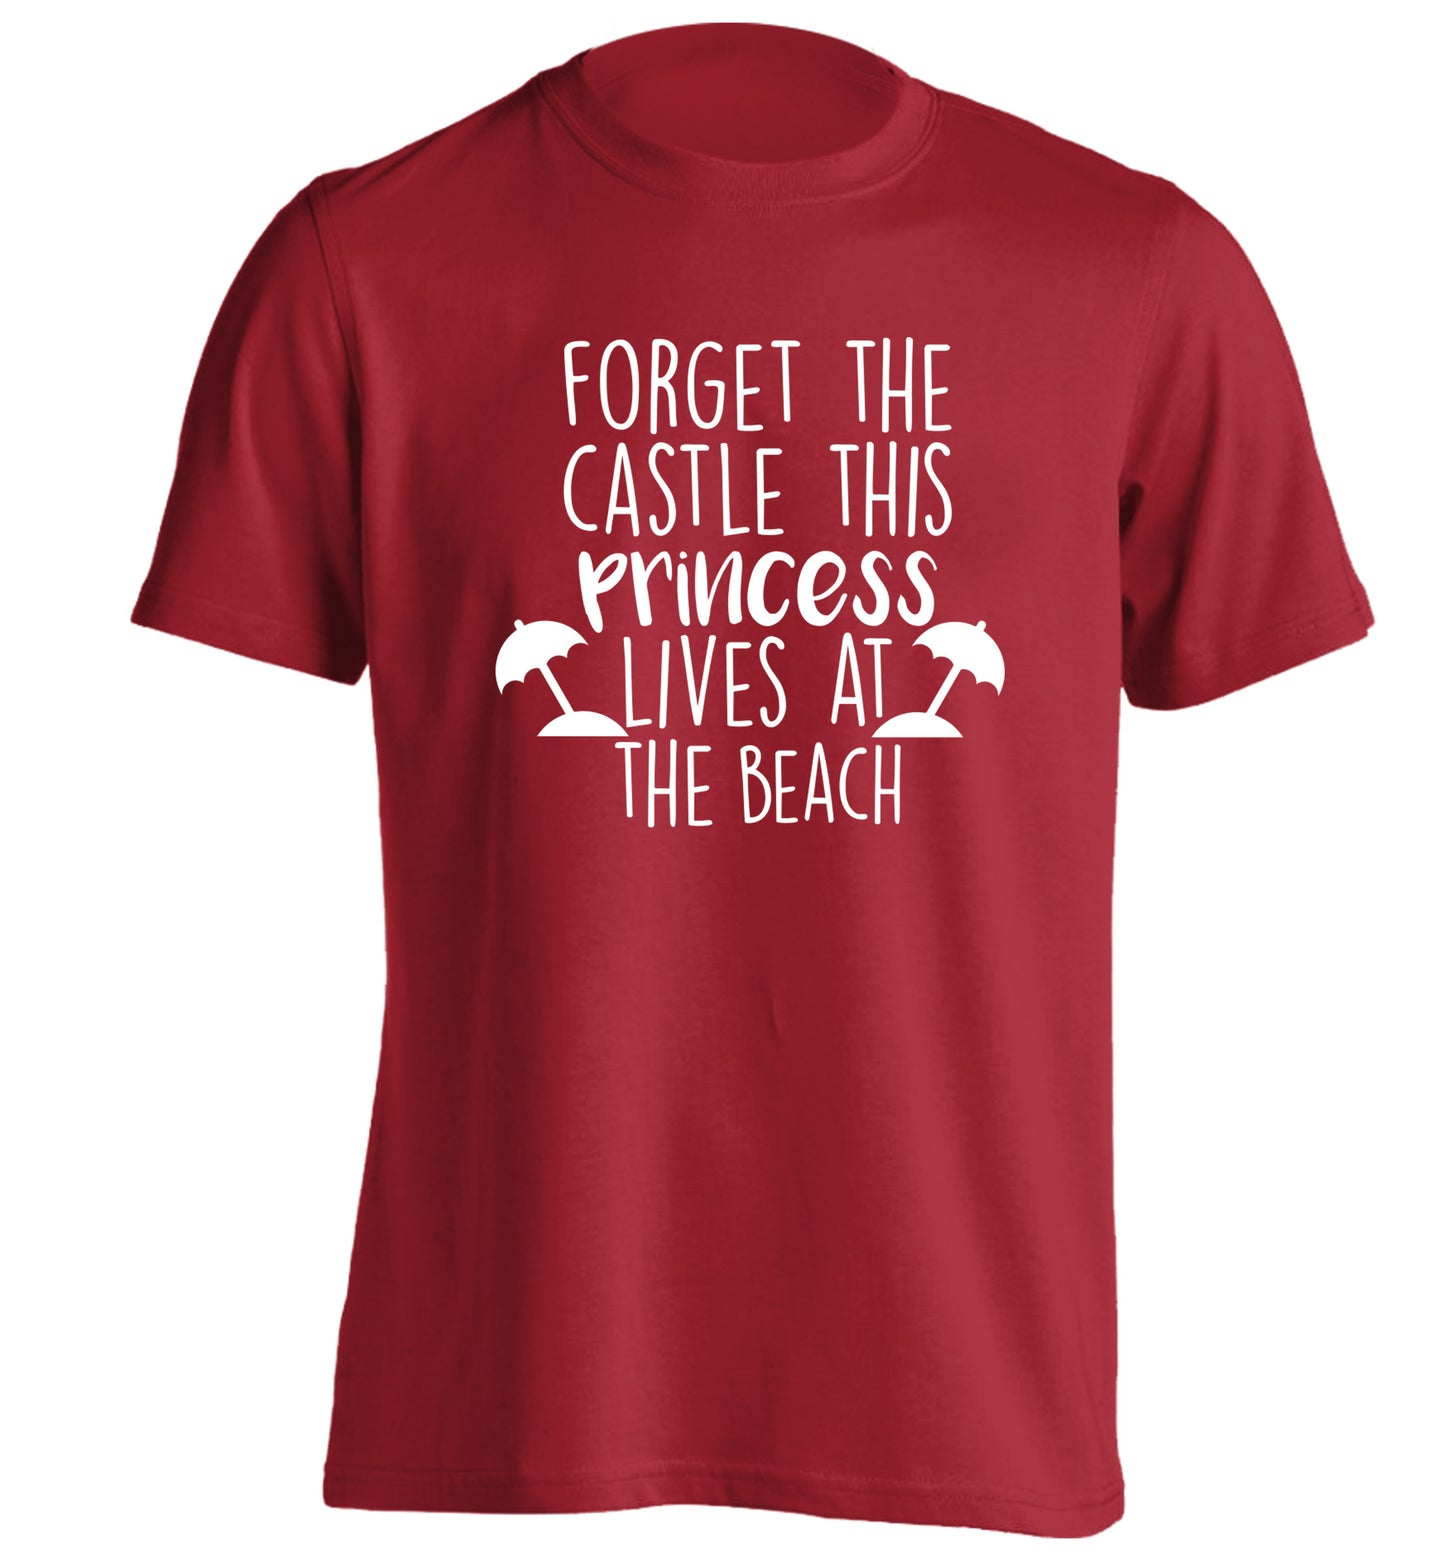 Forget the castle this princess lives at the beach adults unisex red Tshirt 2XL